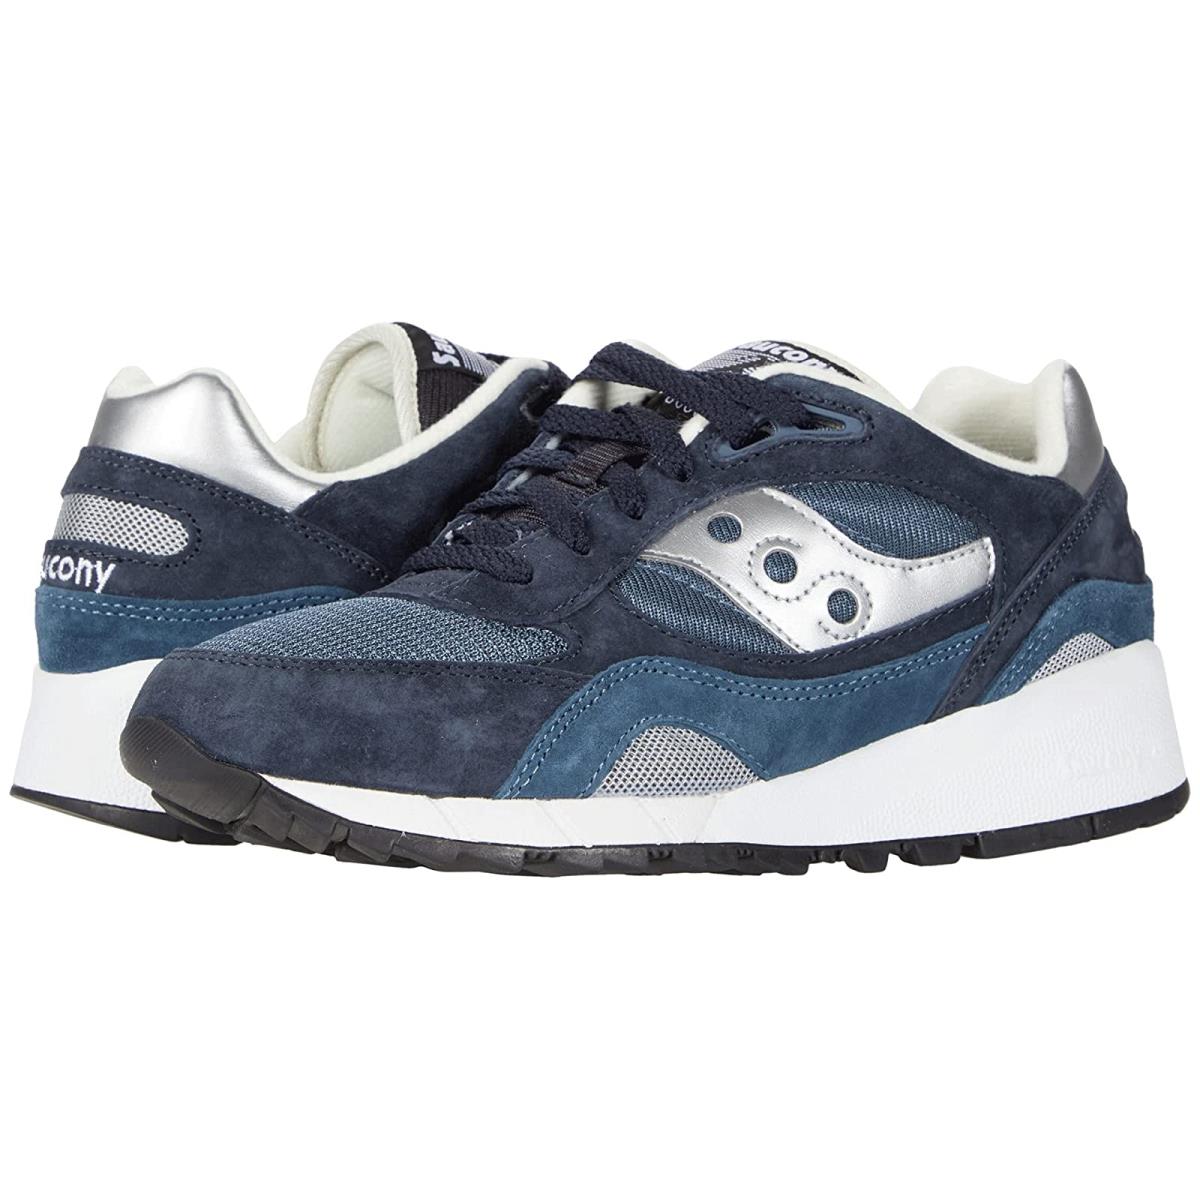 Unisex Sneakers Athletic Shoes Saucony Originals Shadow 6000 Navy/Silver